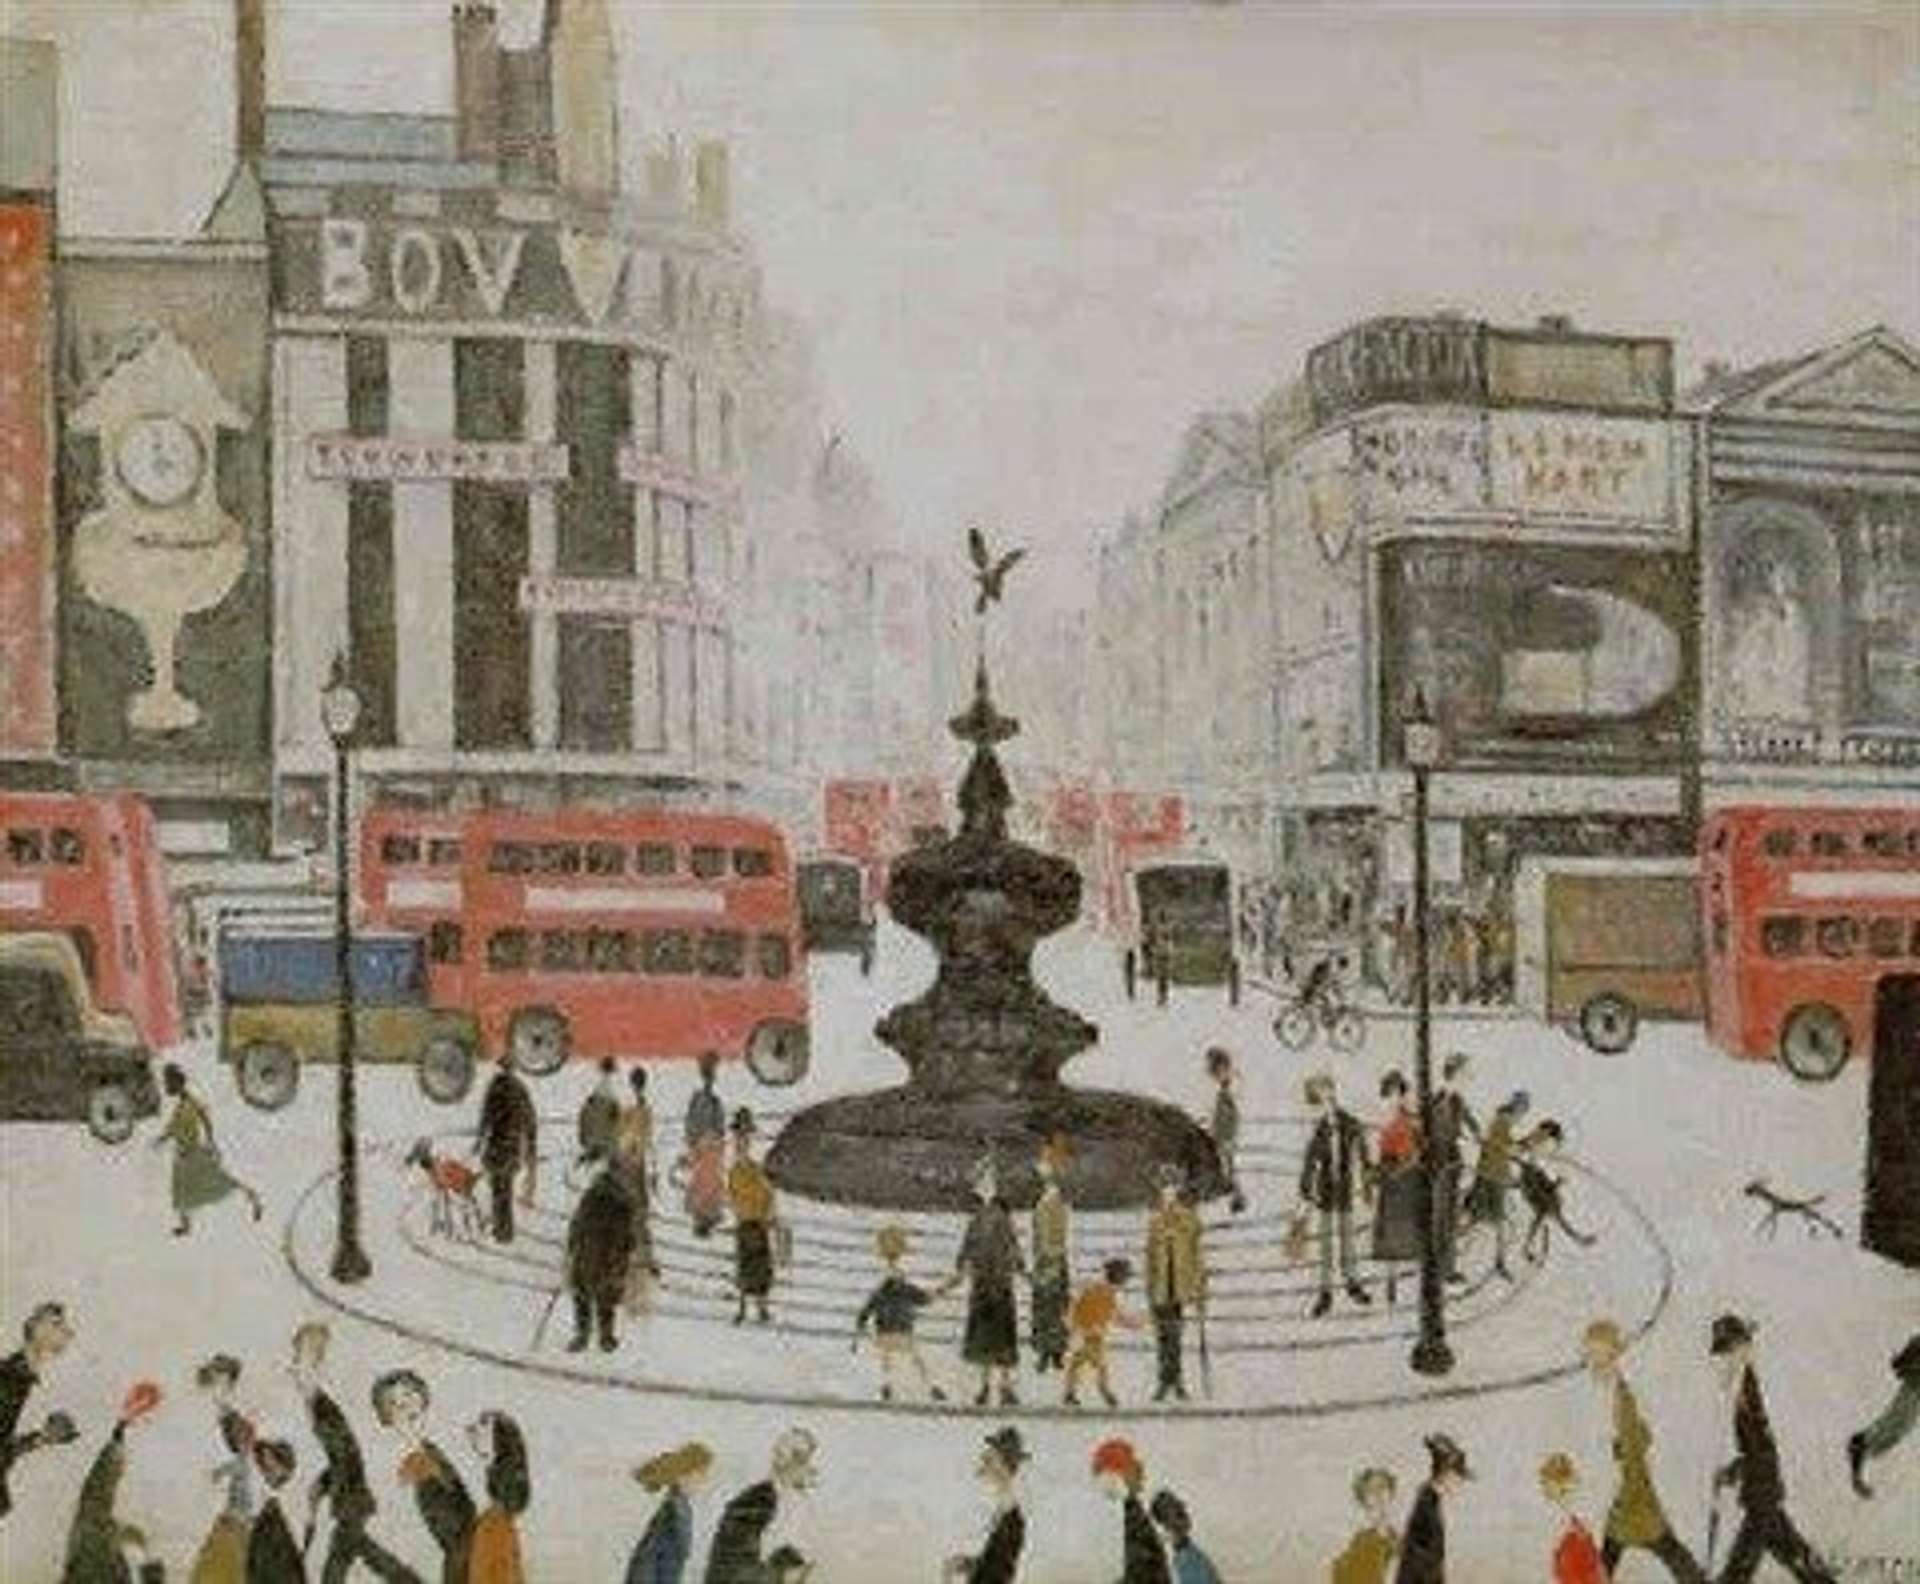 Piccadily Circus by L S Lowry